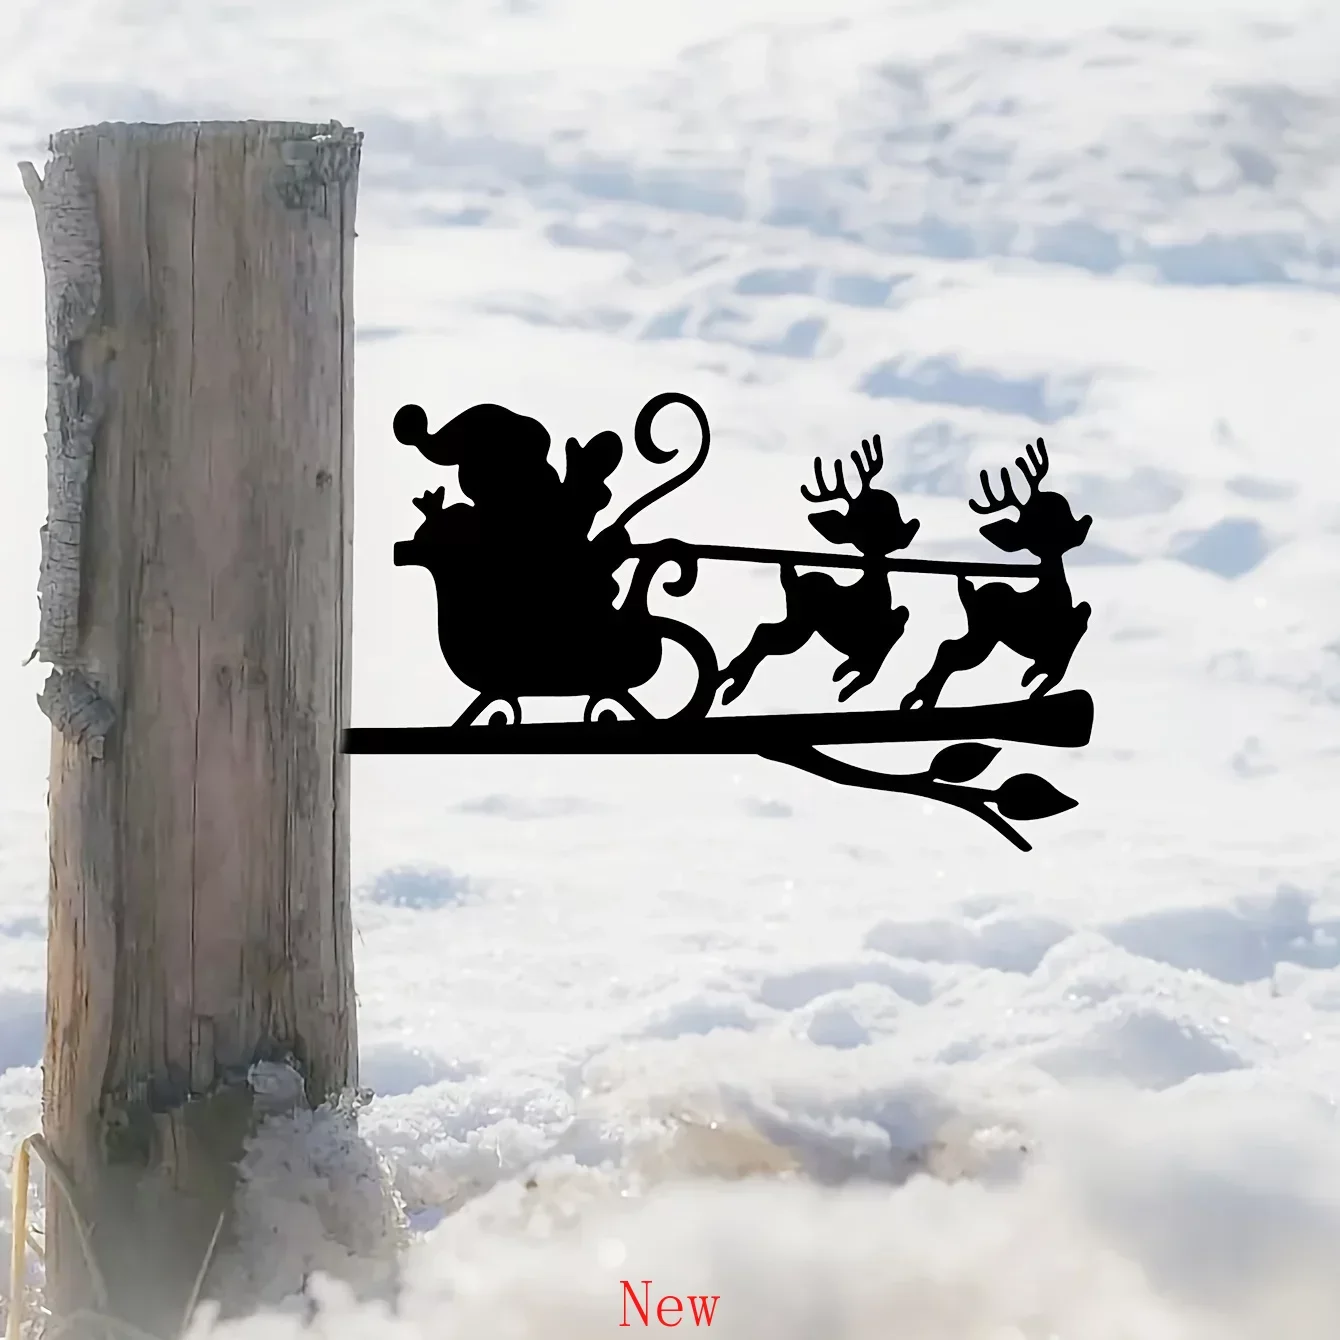 

Little Deers Pulling Sleds On Branch Iron Art Silhouette Home Garden Yard decor Patio Outdoor Decoration Christmas Decoration w